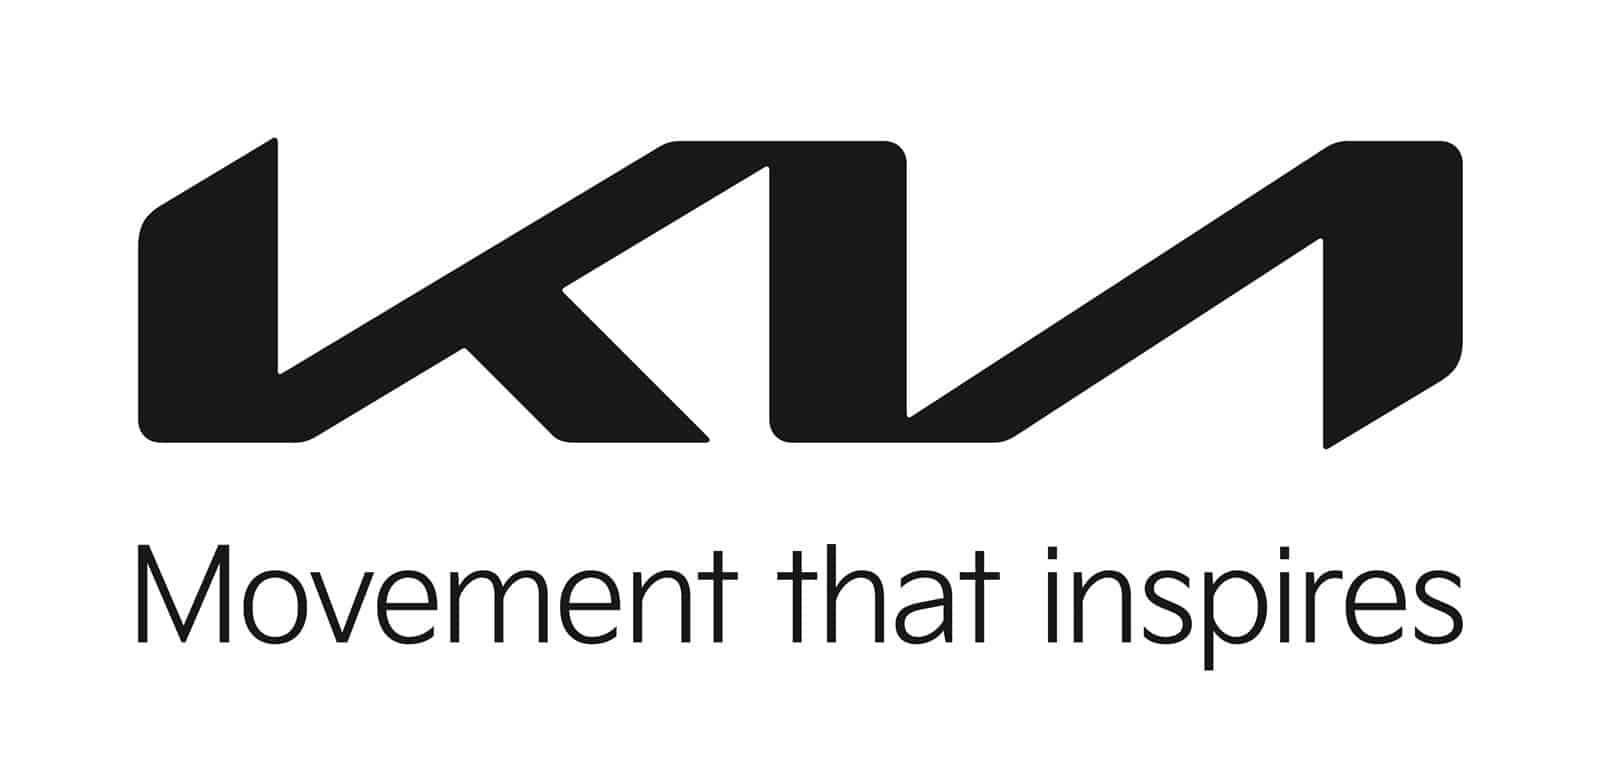 KIA makes its new logo official, what do you think?